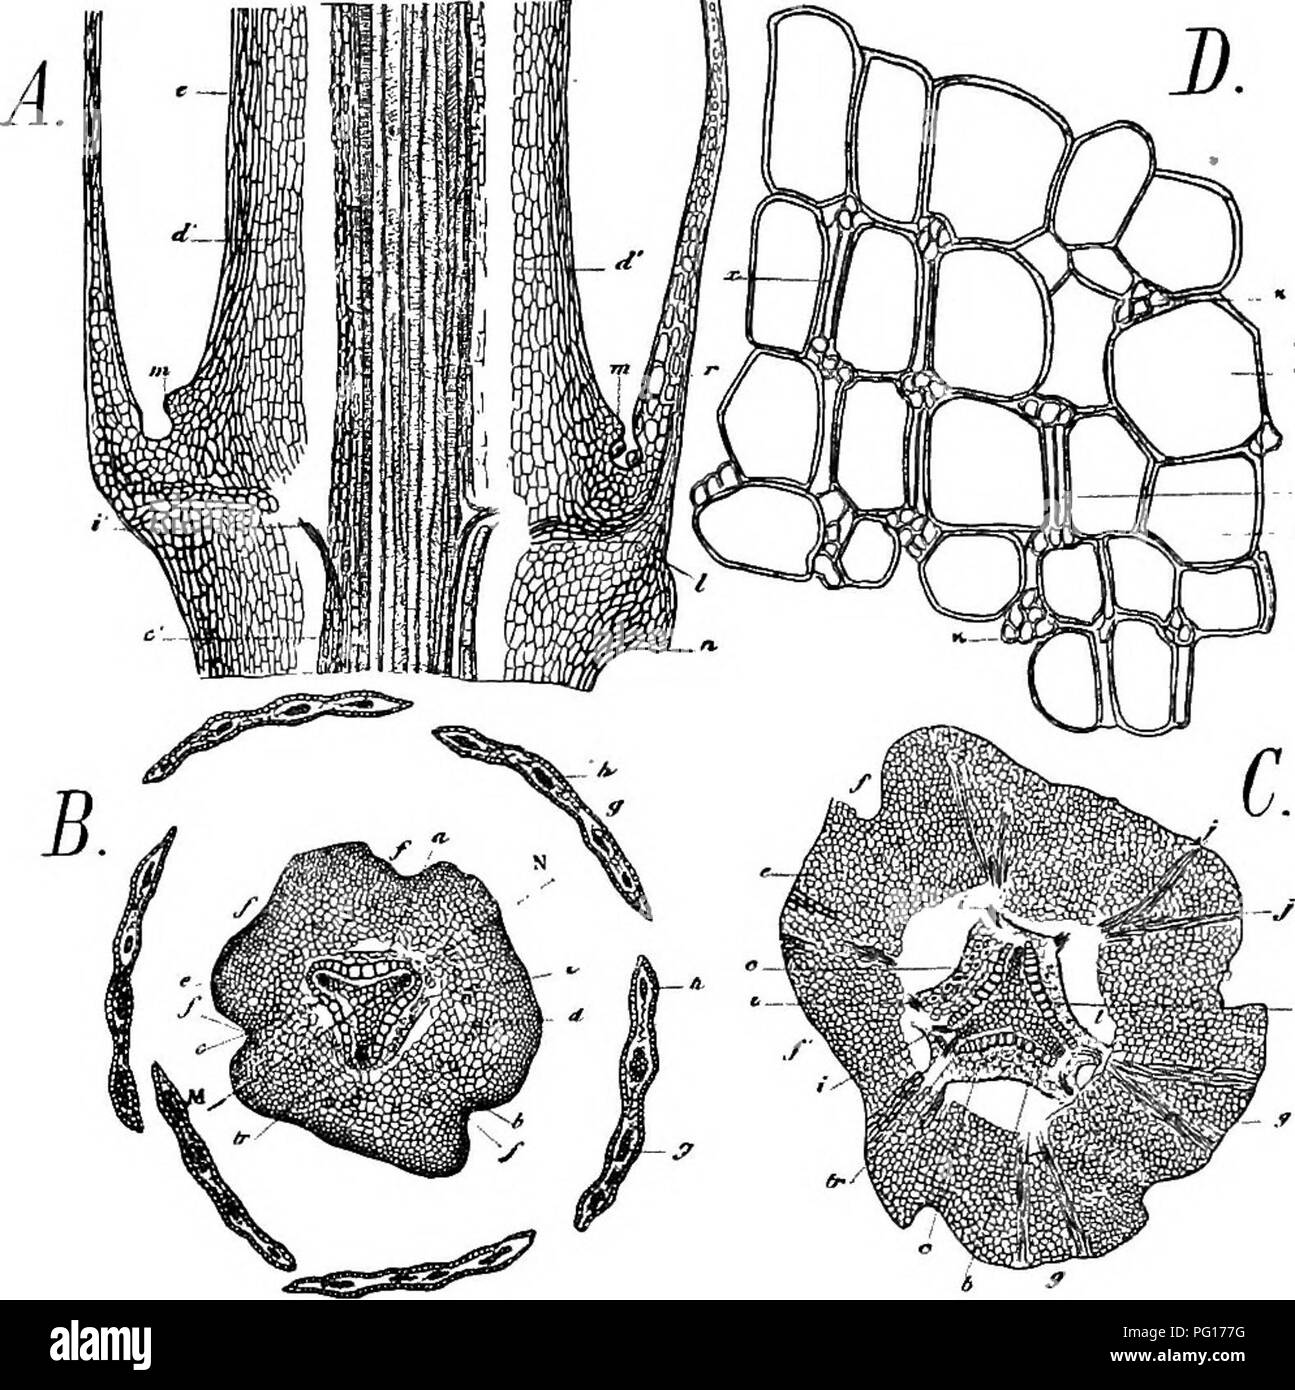 . Studies in fossil botany . Paleobotany. go STUDIES IN FOSSIL BOTANY many roots ; such a structure is very rare in stems, though we find an example in the smaller branches of Psilotum. In some French species of Sphenophyllum,. Fig. 36.—Sphenopkyllum quadrifidum. A. Radial section through a node, showing leaves, cut in the plane bin of Fig. B. In the middle is the stele, showing primary and secondary wood, c', phloem ; d', inner, e, outer cortex ; z', leaf-trace ; /, base of leaf; m, axillary bud (?); n, cortical emergence below node. B. Transverse section of same stem, a little above node, sh Stock Photo